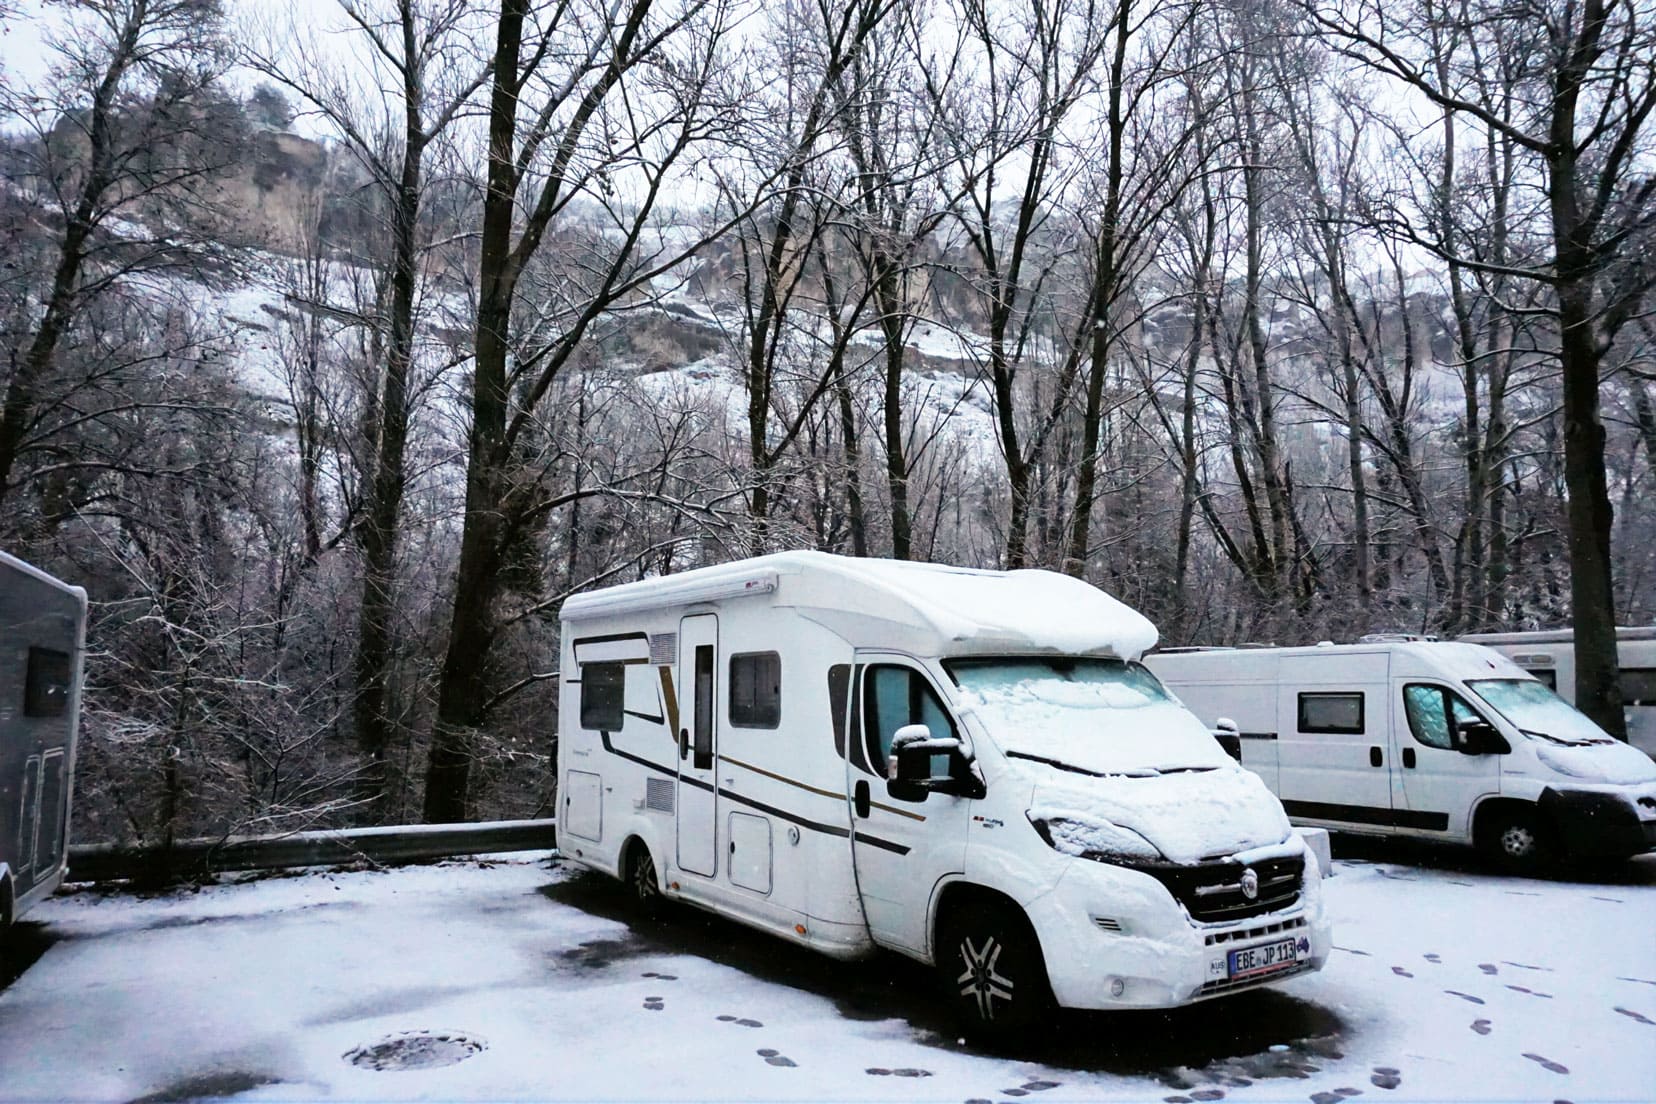 our motorhome parked in the snow in winter with bare trees behind it